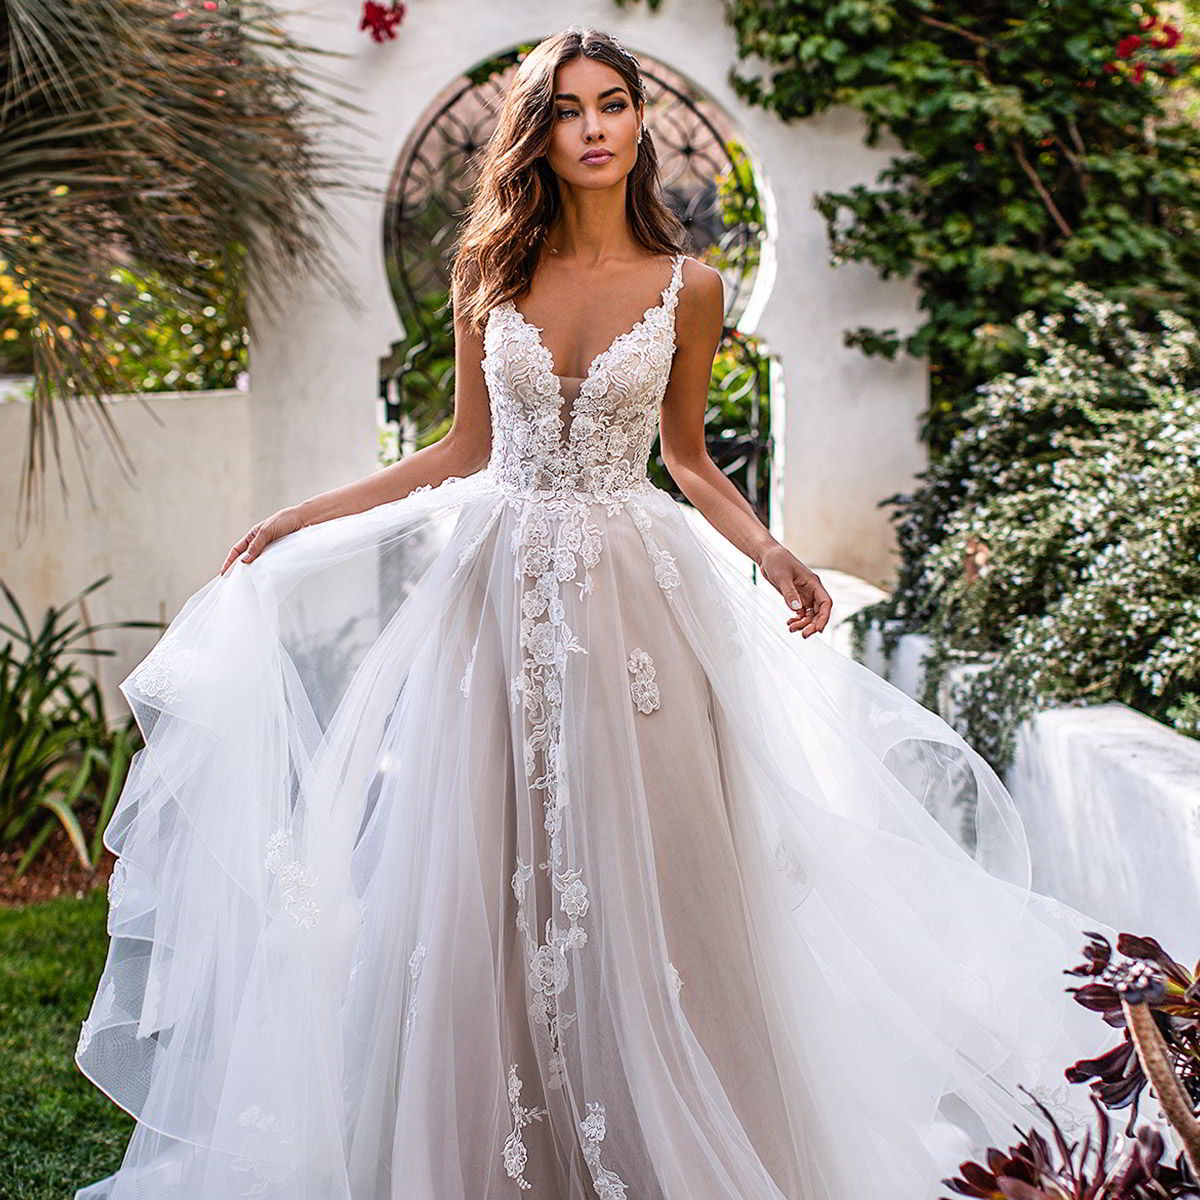 Most Popular Wedding Dresses on Our Pinterest This Year – Wedding ...